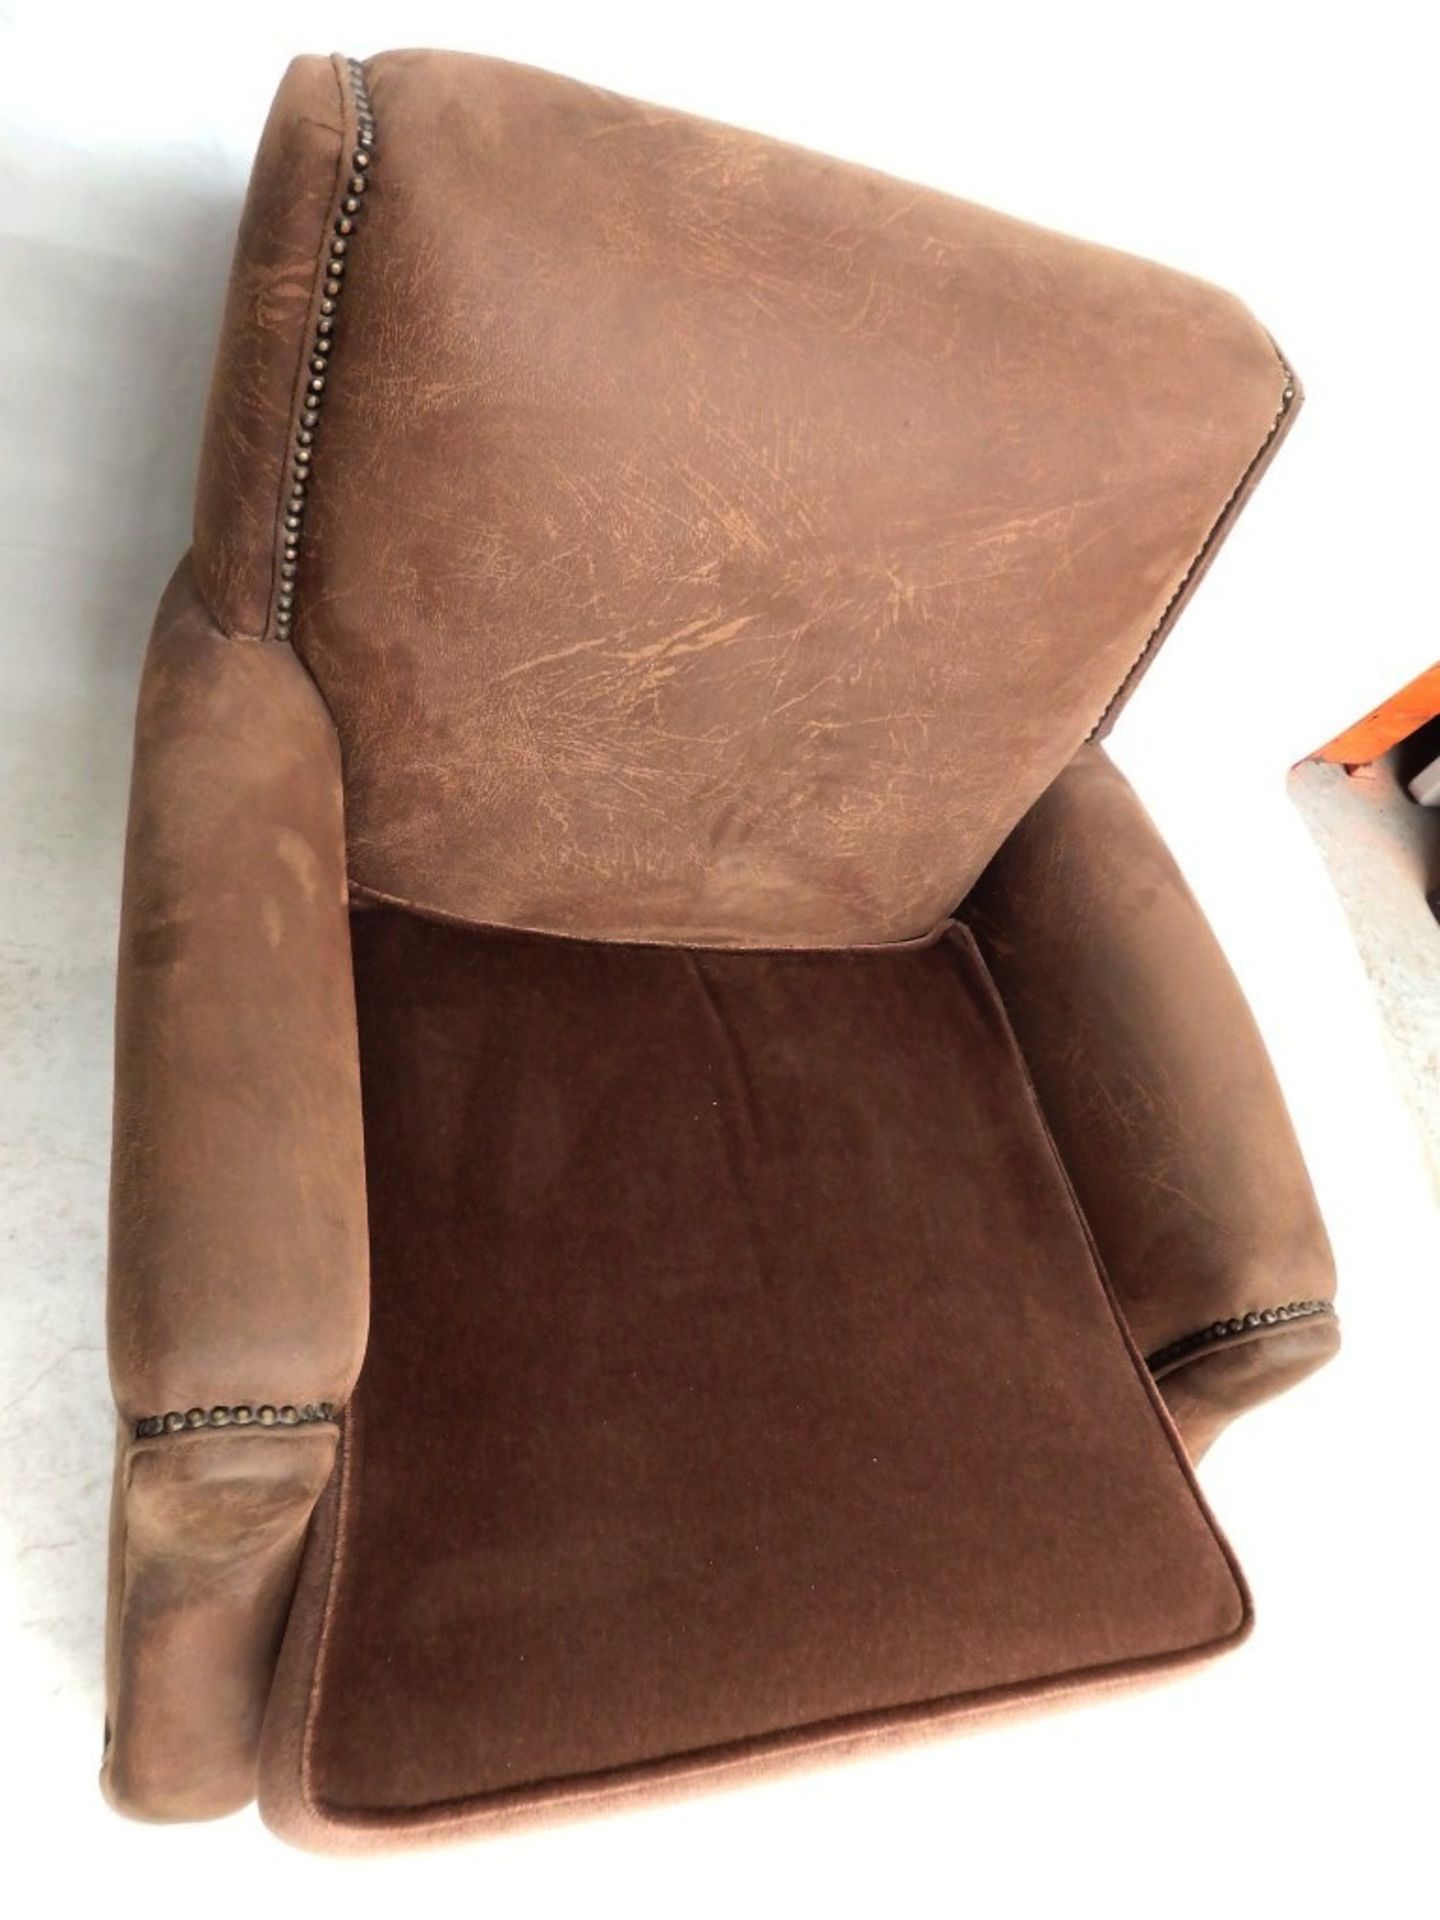 1 x Bespoke Brown Leather & Chenille Armchair - Expertly Built And Upholstered By British - Image 9 of 9